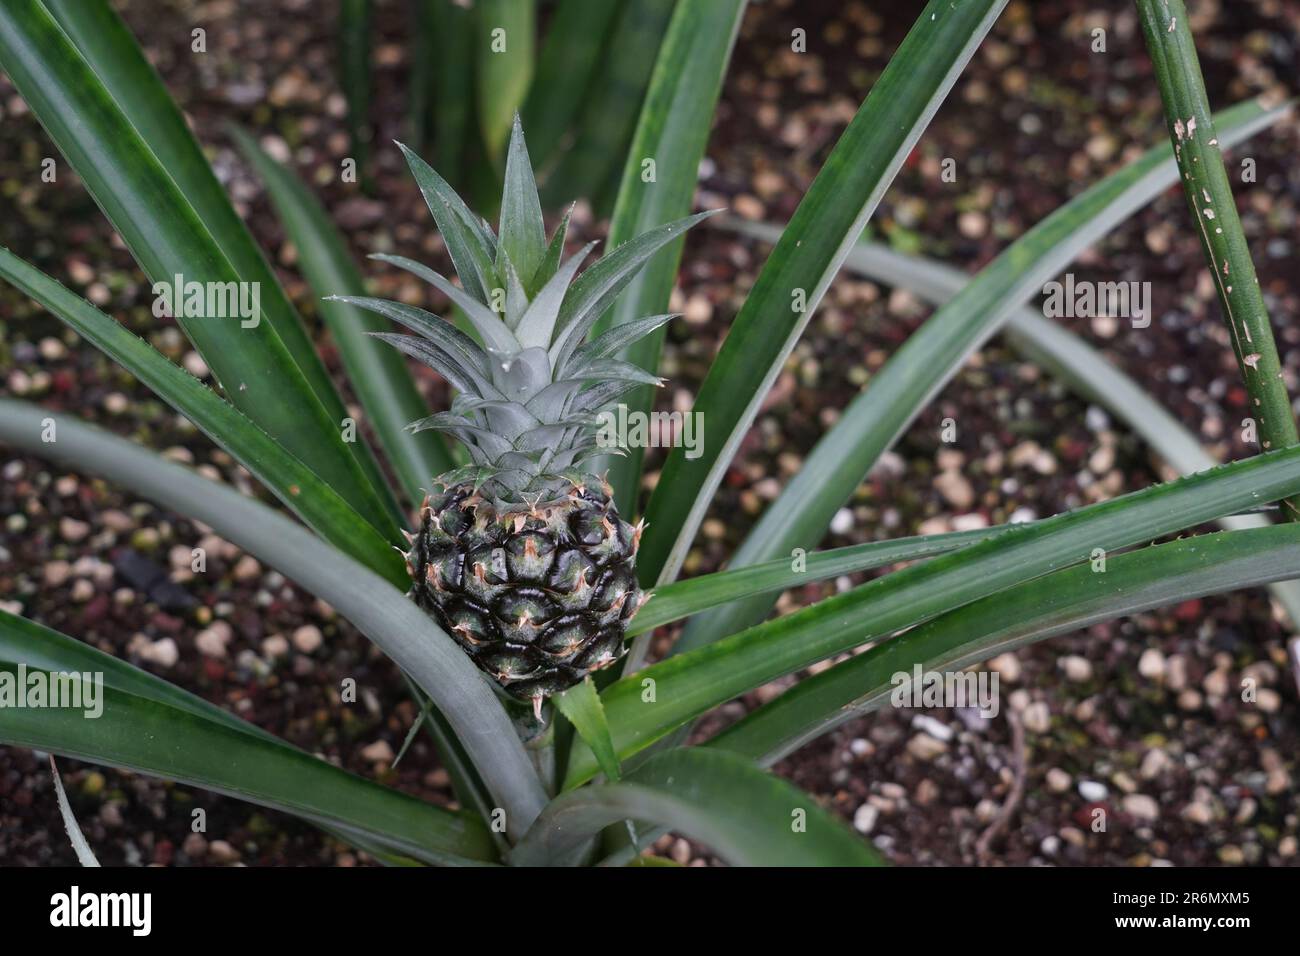 Pineapple fruit, in Latin called Ananas comosus L. Marr, growing naturally out of rosette of leaves. Stock Photo